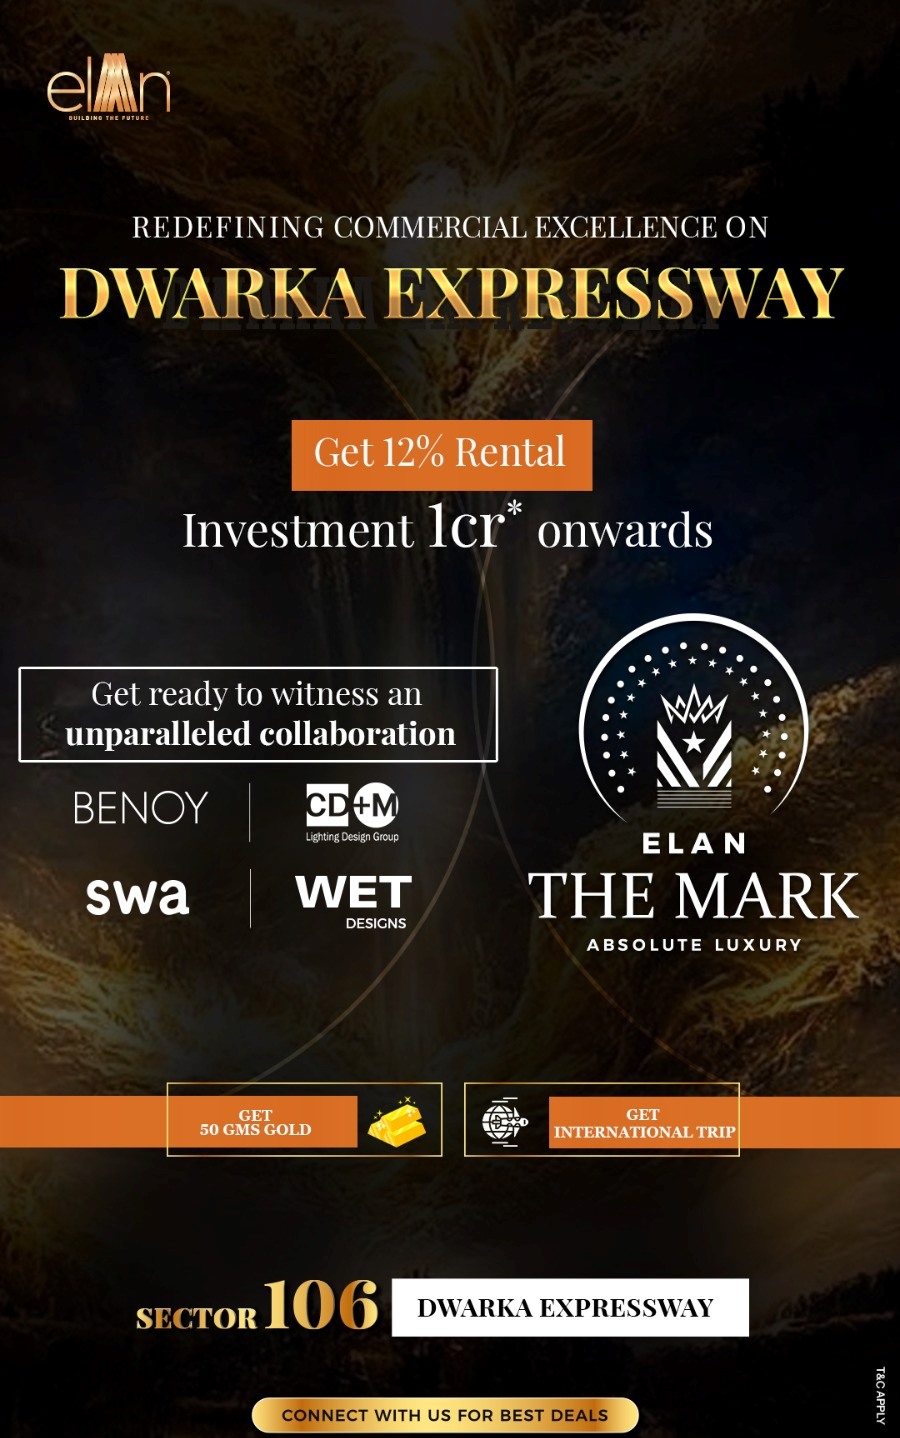 Get 12% rental and investment starts Rs 1Cr onwards at Elan The Mark in Sector 106, Gurgaon Update